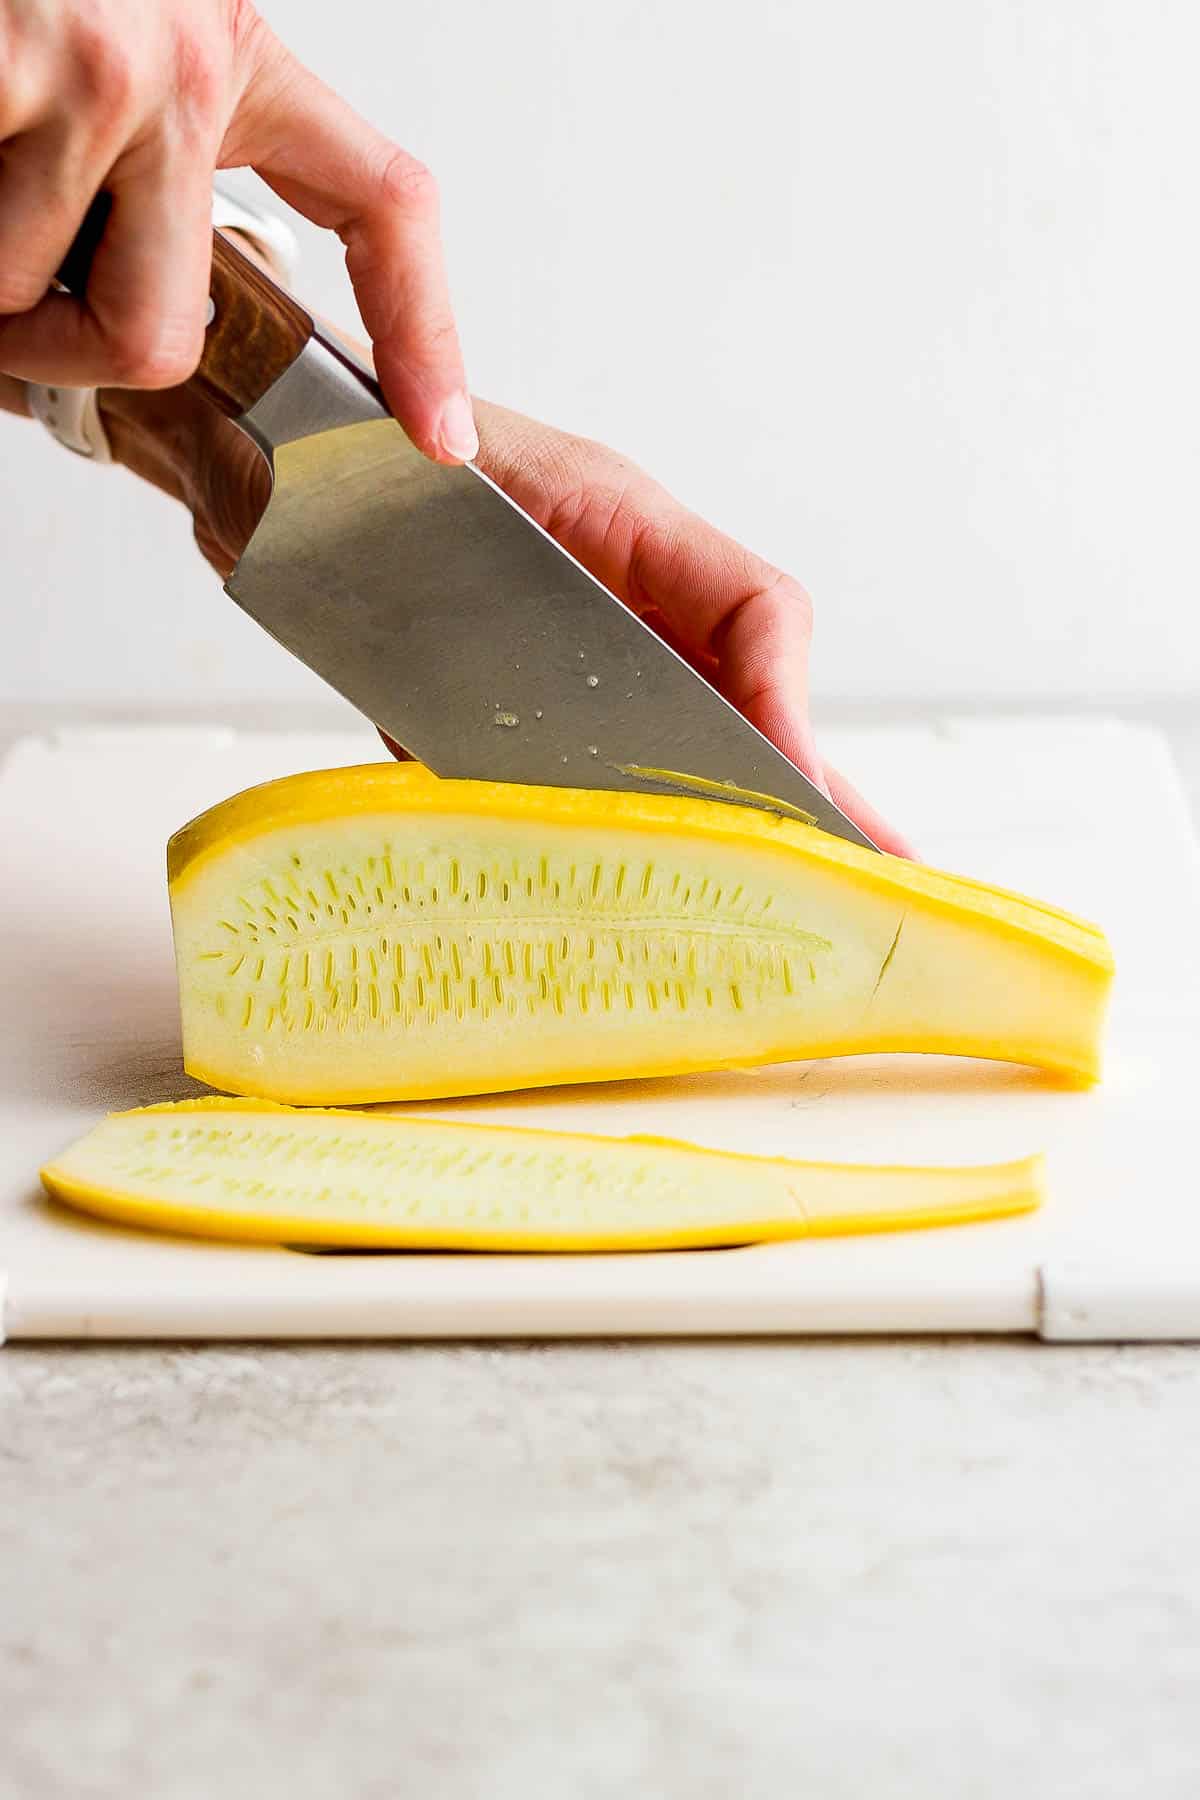 A large knife cutting a yellow squash into 1/2 inch planks.